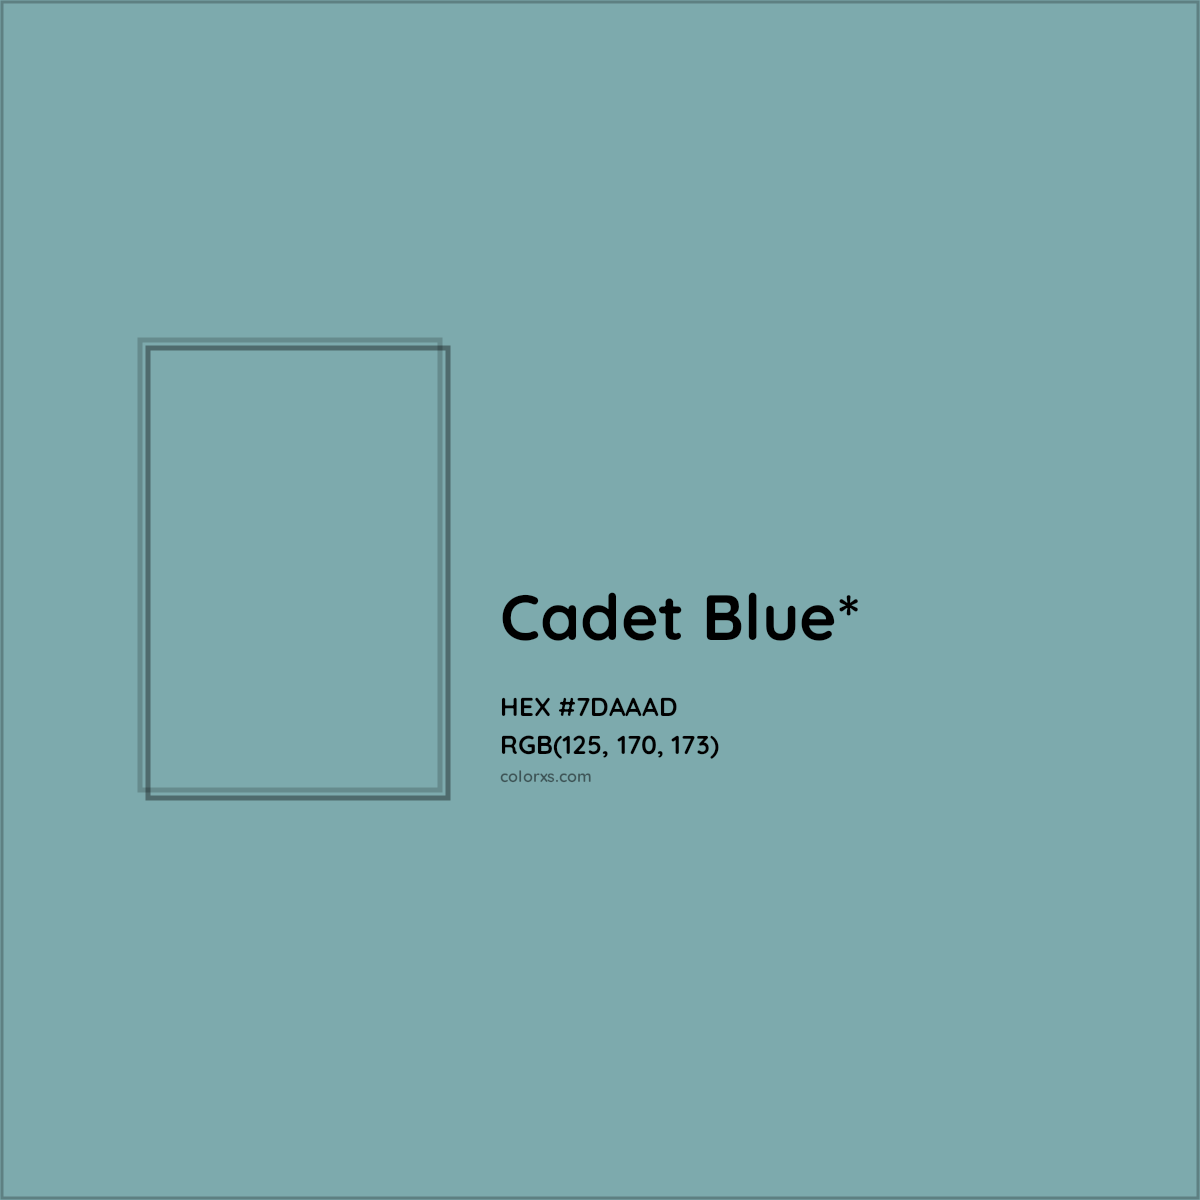 HEX #7DAAAD Color Name, Color Code, Palettes, Similar Paints, Images